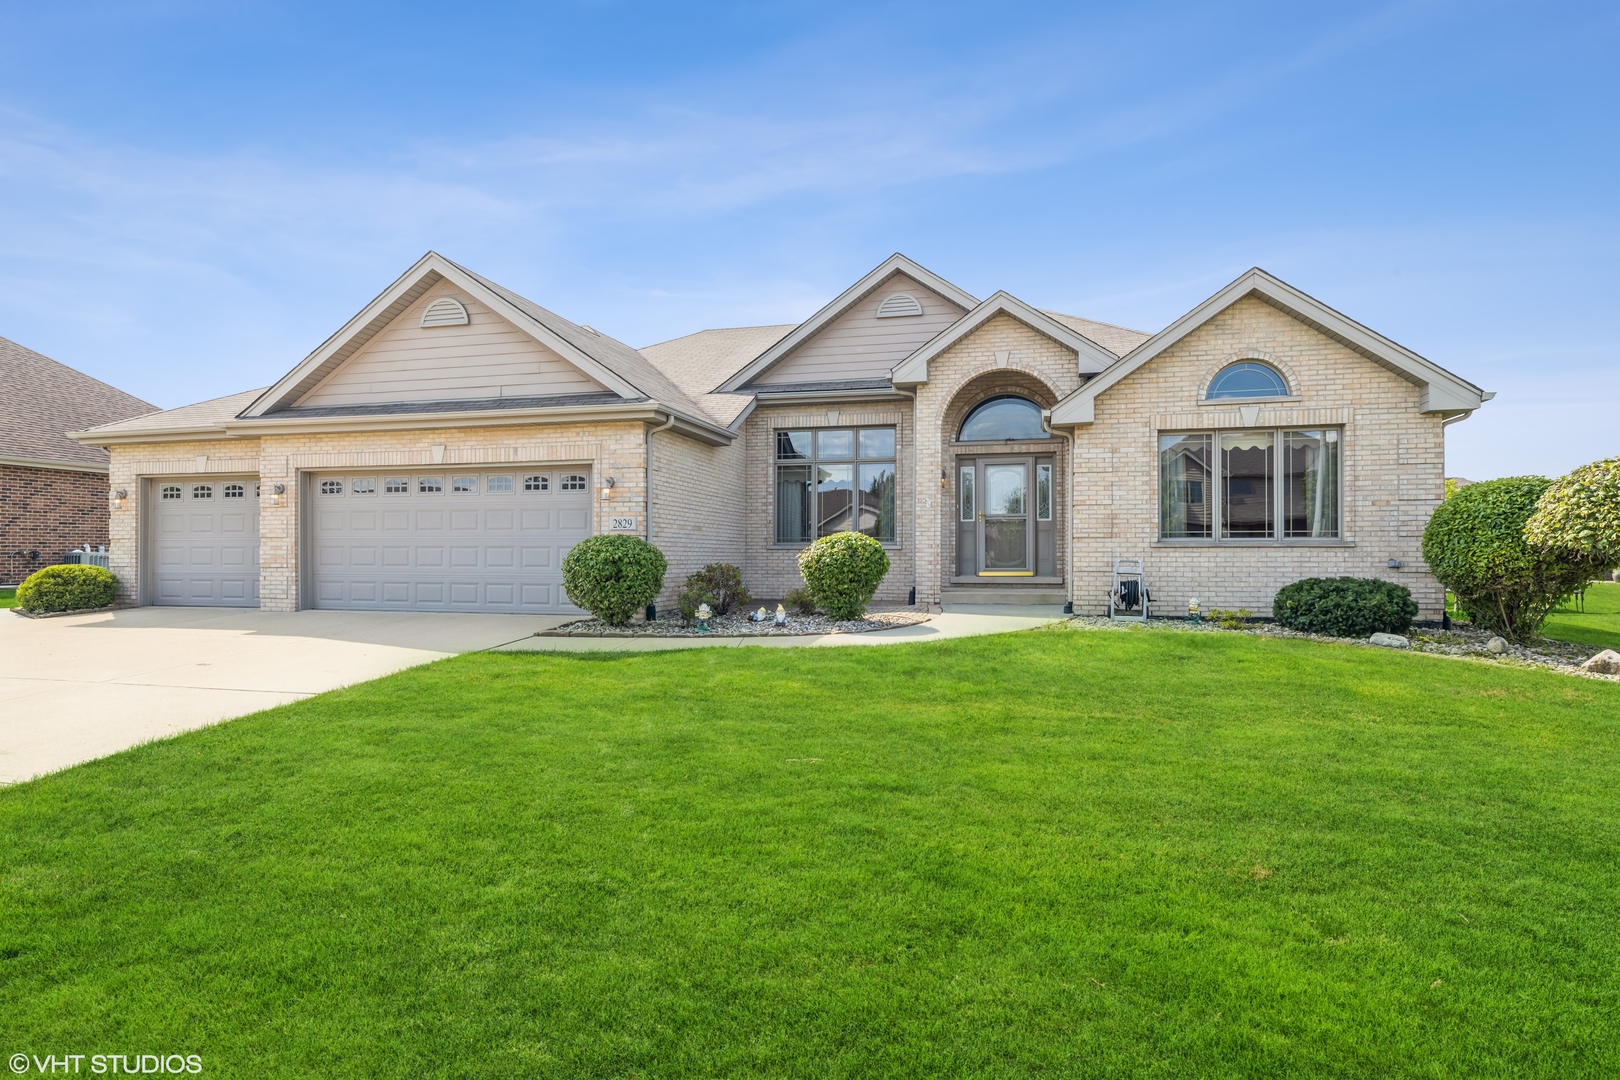 New Lenox IL Homes For Sale New Lenox Real Estate Bowers Realty Group